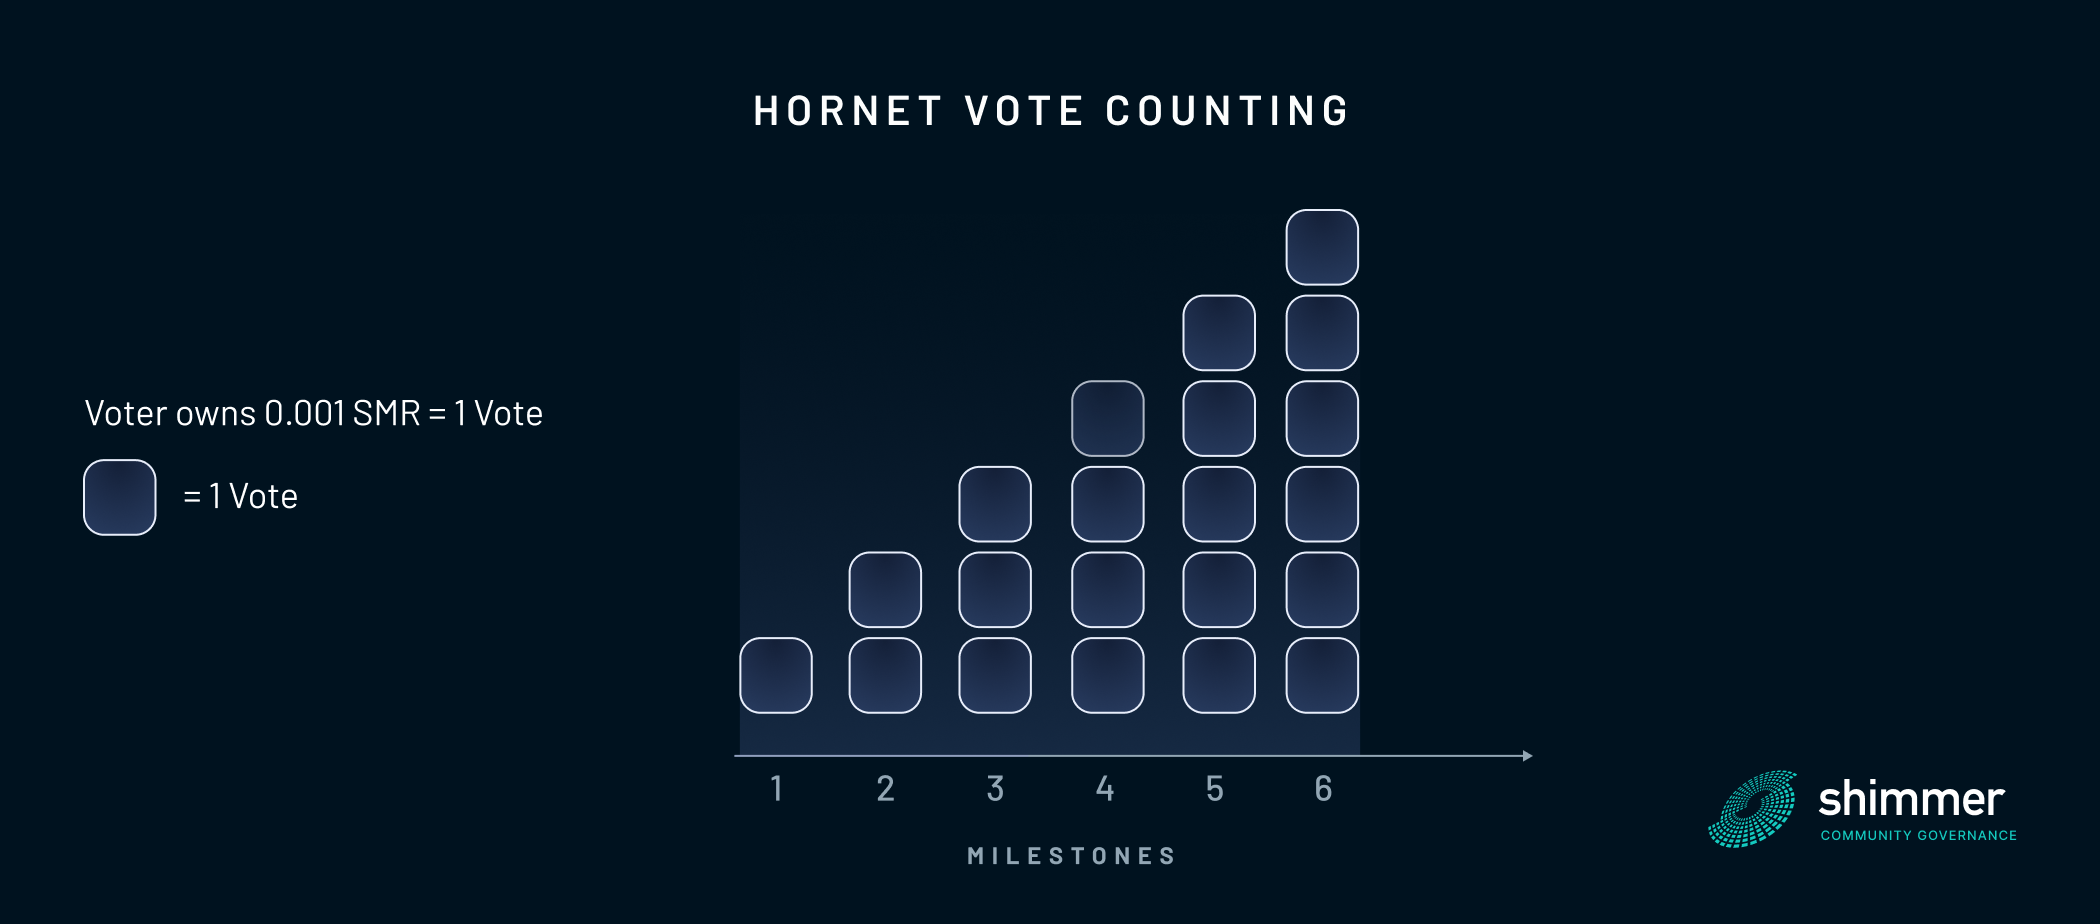 Hornet vote counting